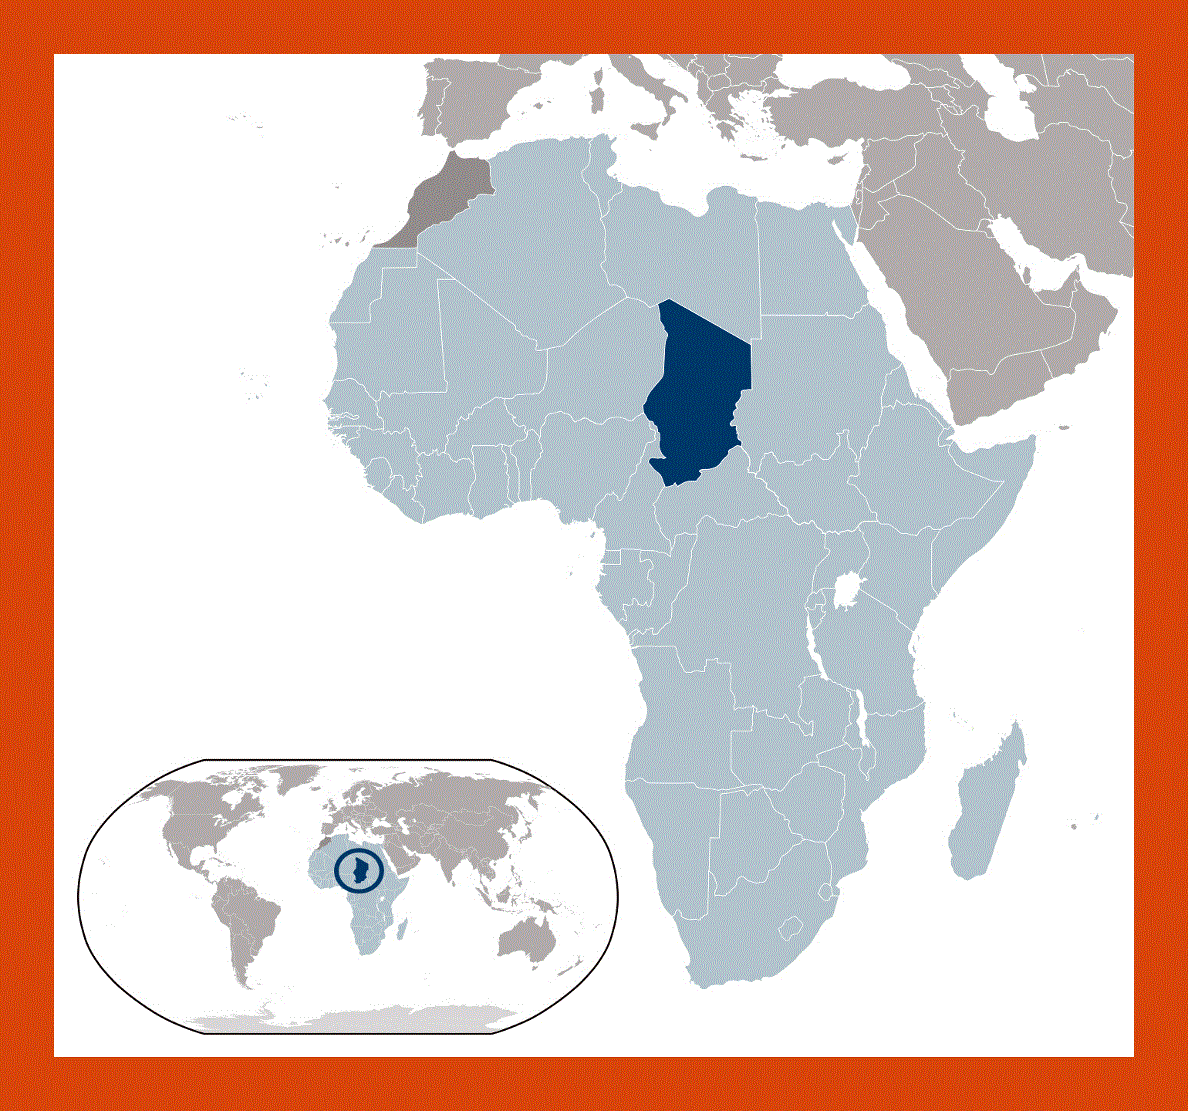 Location map of Chad